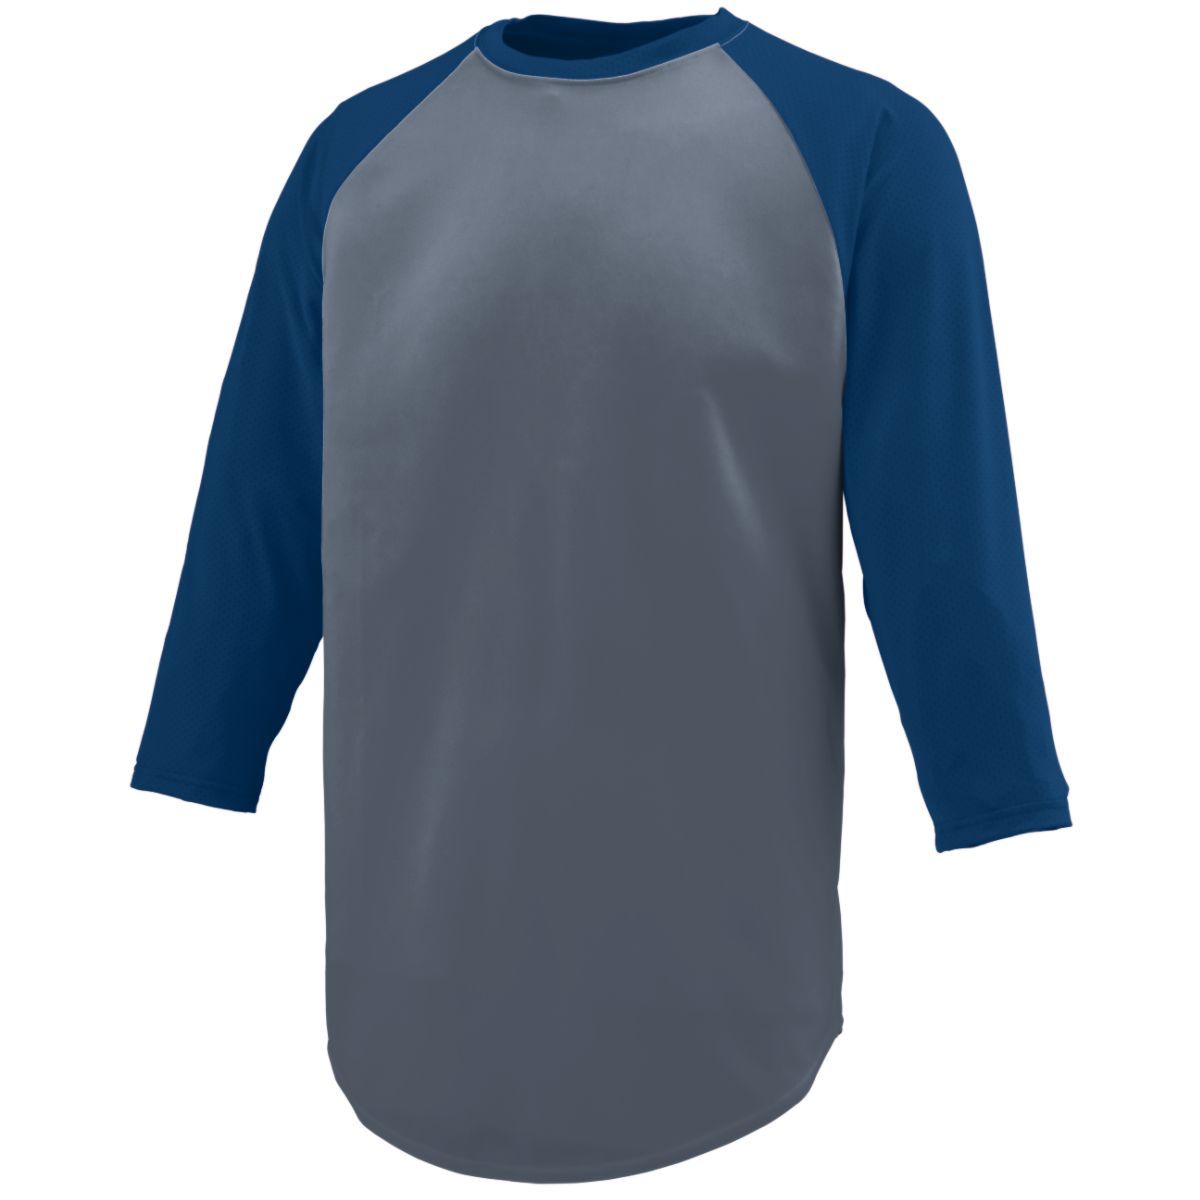 Augusta Sportswear Nova Jersey in Graphite/Navy  -Part of the Adult, Adult-Jersey, Augusta-Products, Baseball, Shirts, All-Sports, All-Sports-1 product lines at KanaleyCreations.com